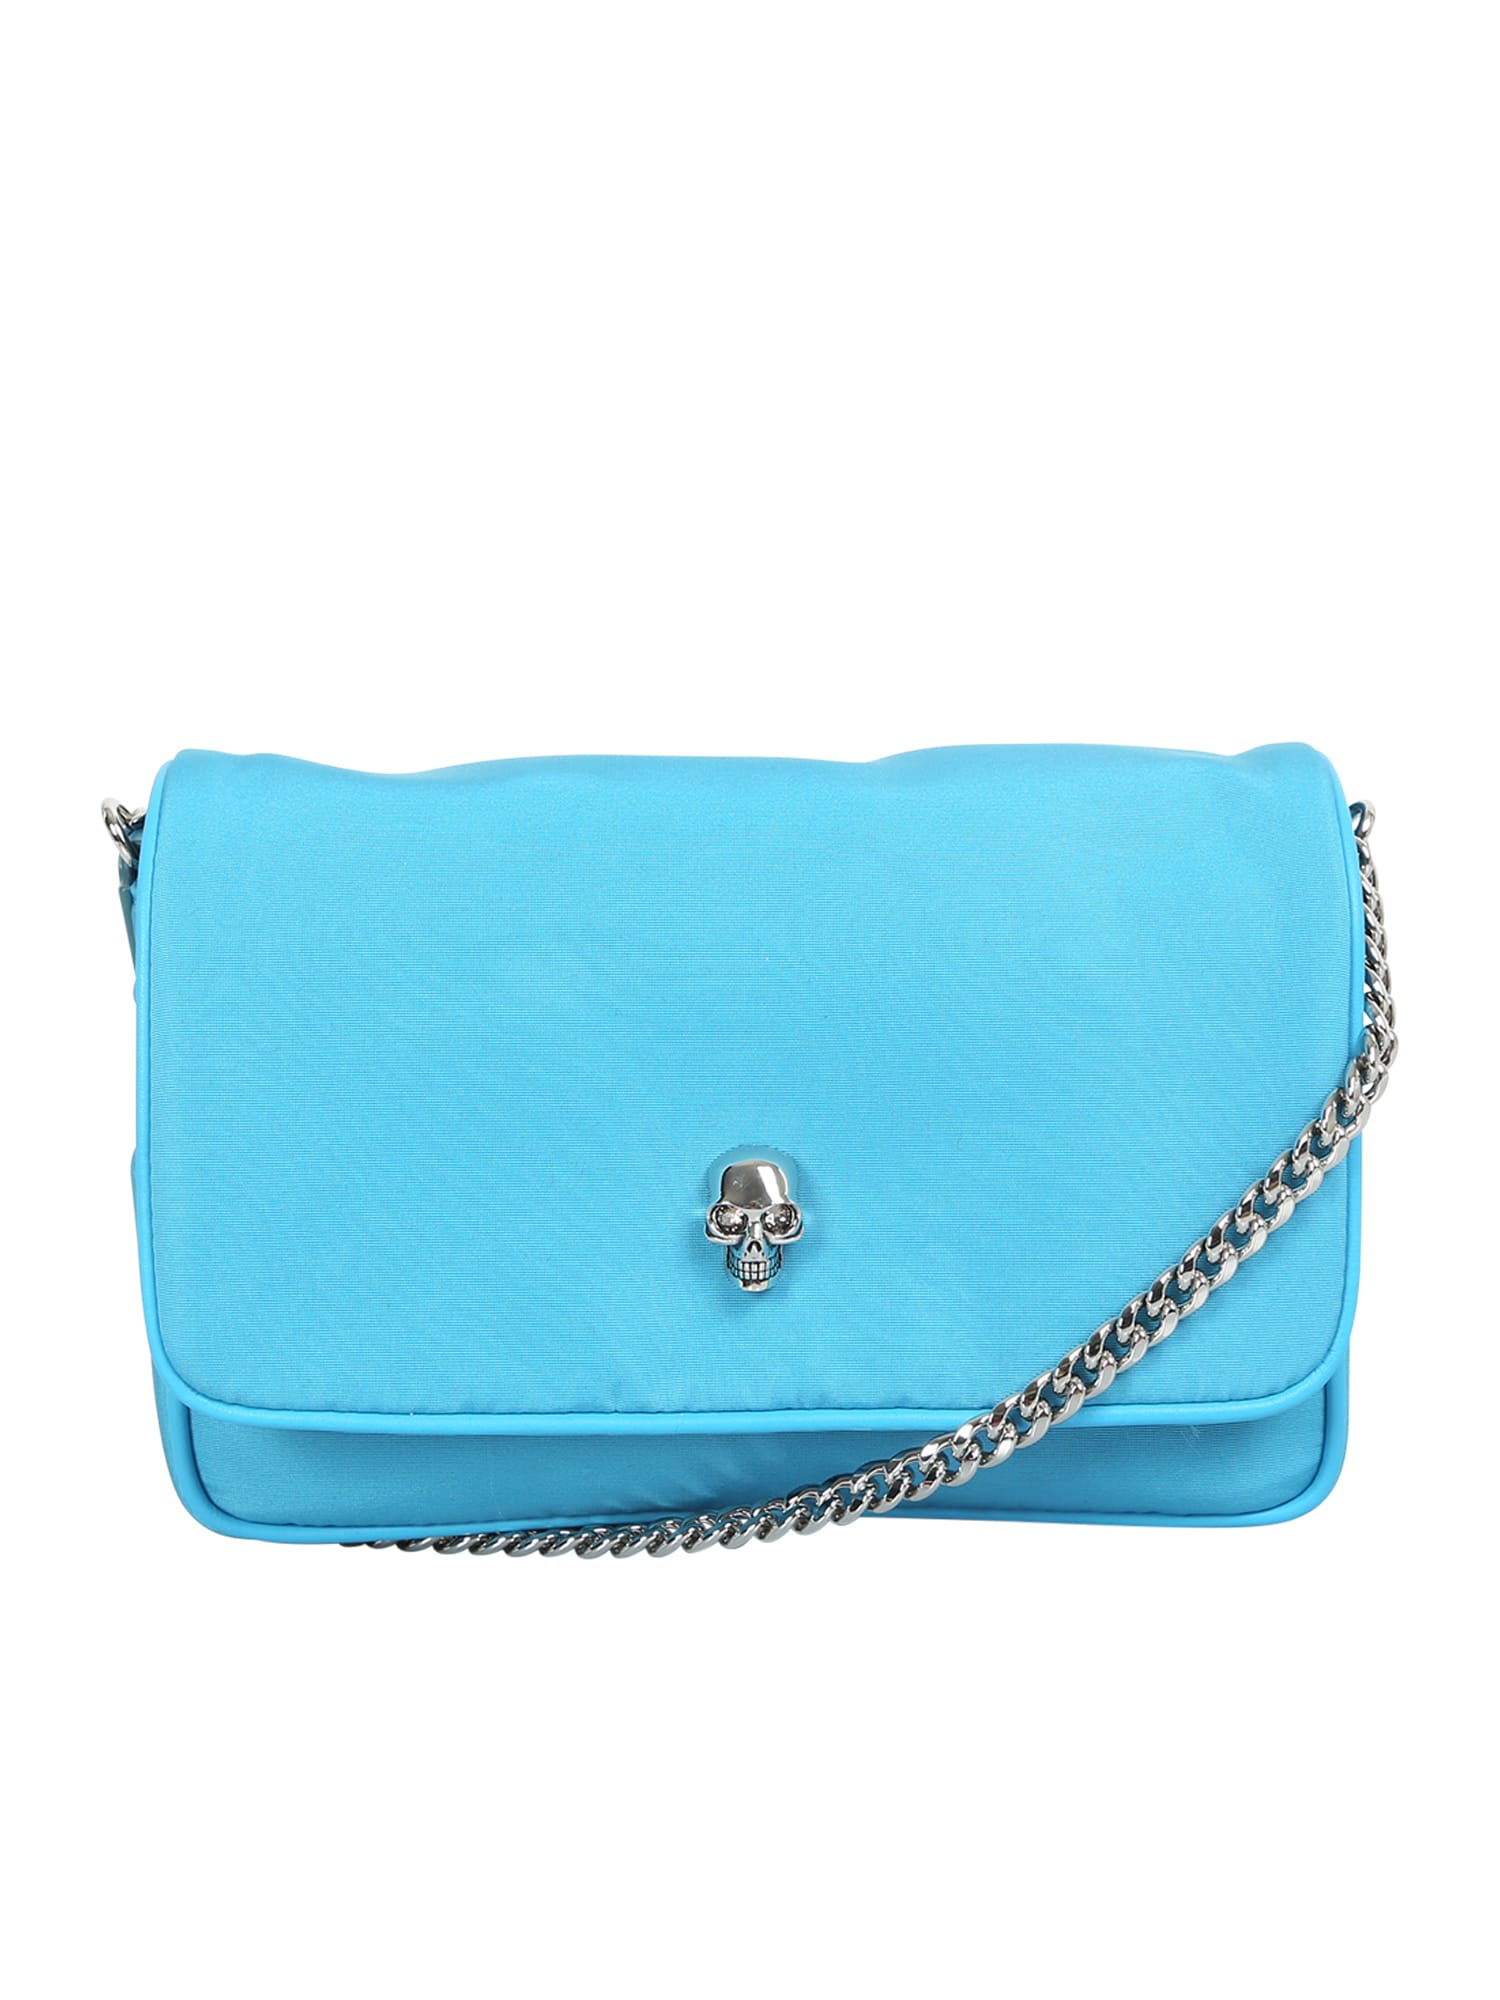 Alexander Mcqueen Skull Small Light Blue Shoulder Bag In Recycled Polyfaille With Skull Detail At Front And Chain Shou